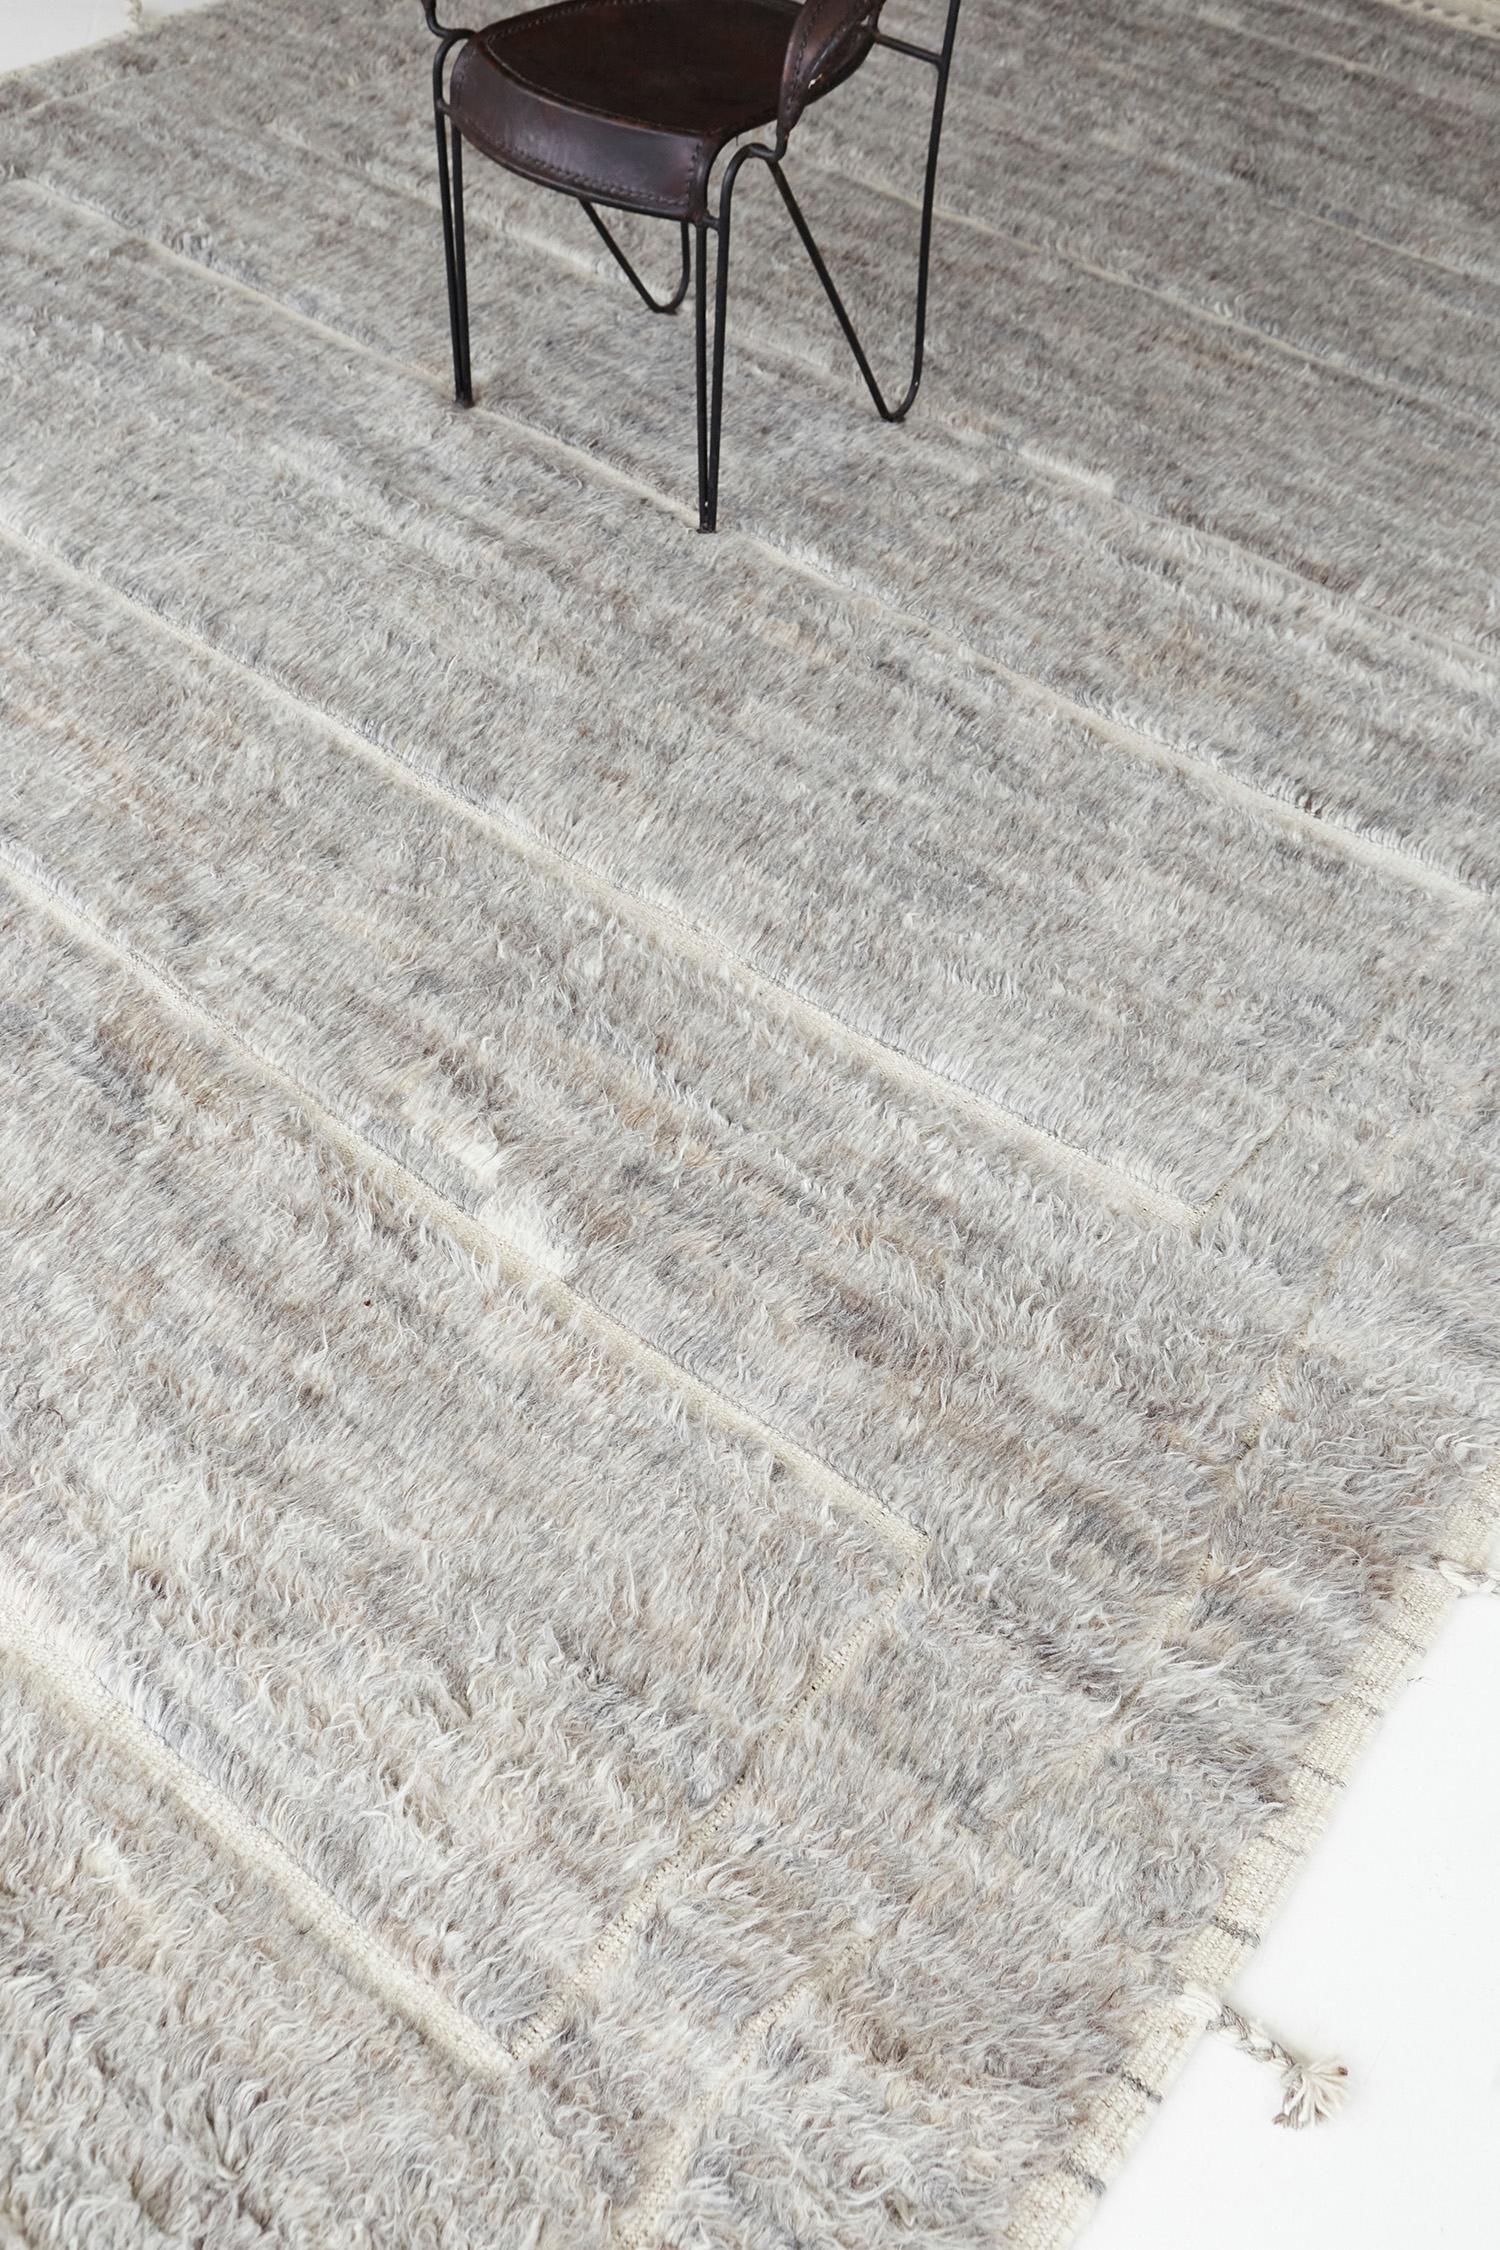 Cierzo is a signature collection of California. Handwoven luxurious wool rug, made of timeless design elements and neutral tones. Haute Bohemian collection: designed in Los Angeles named for the winds knitting together seasons, trees, dwellers of